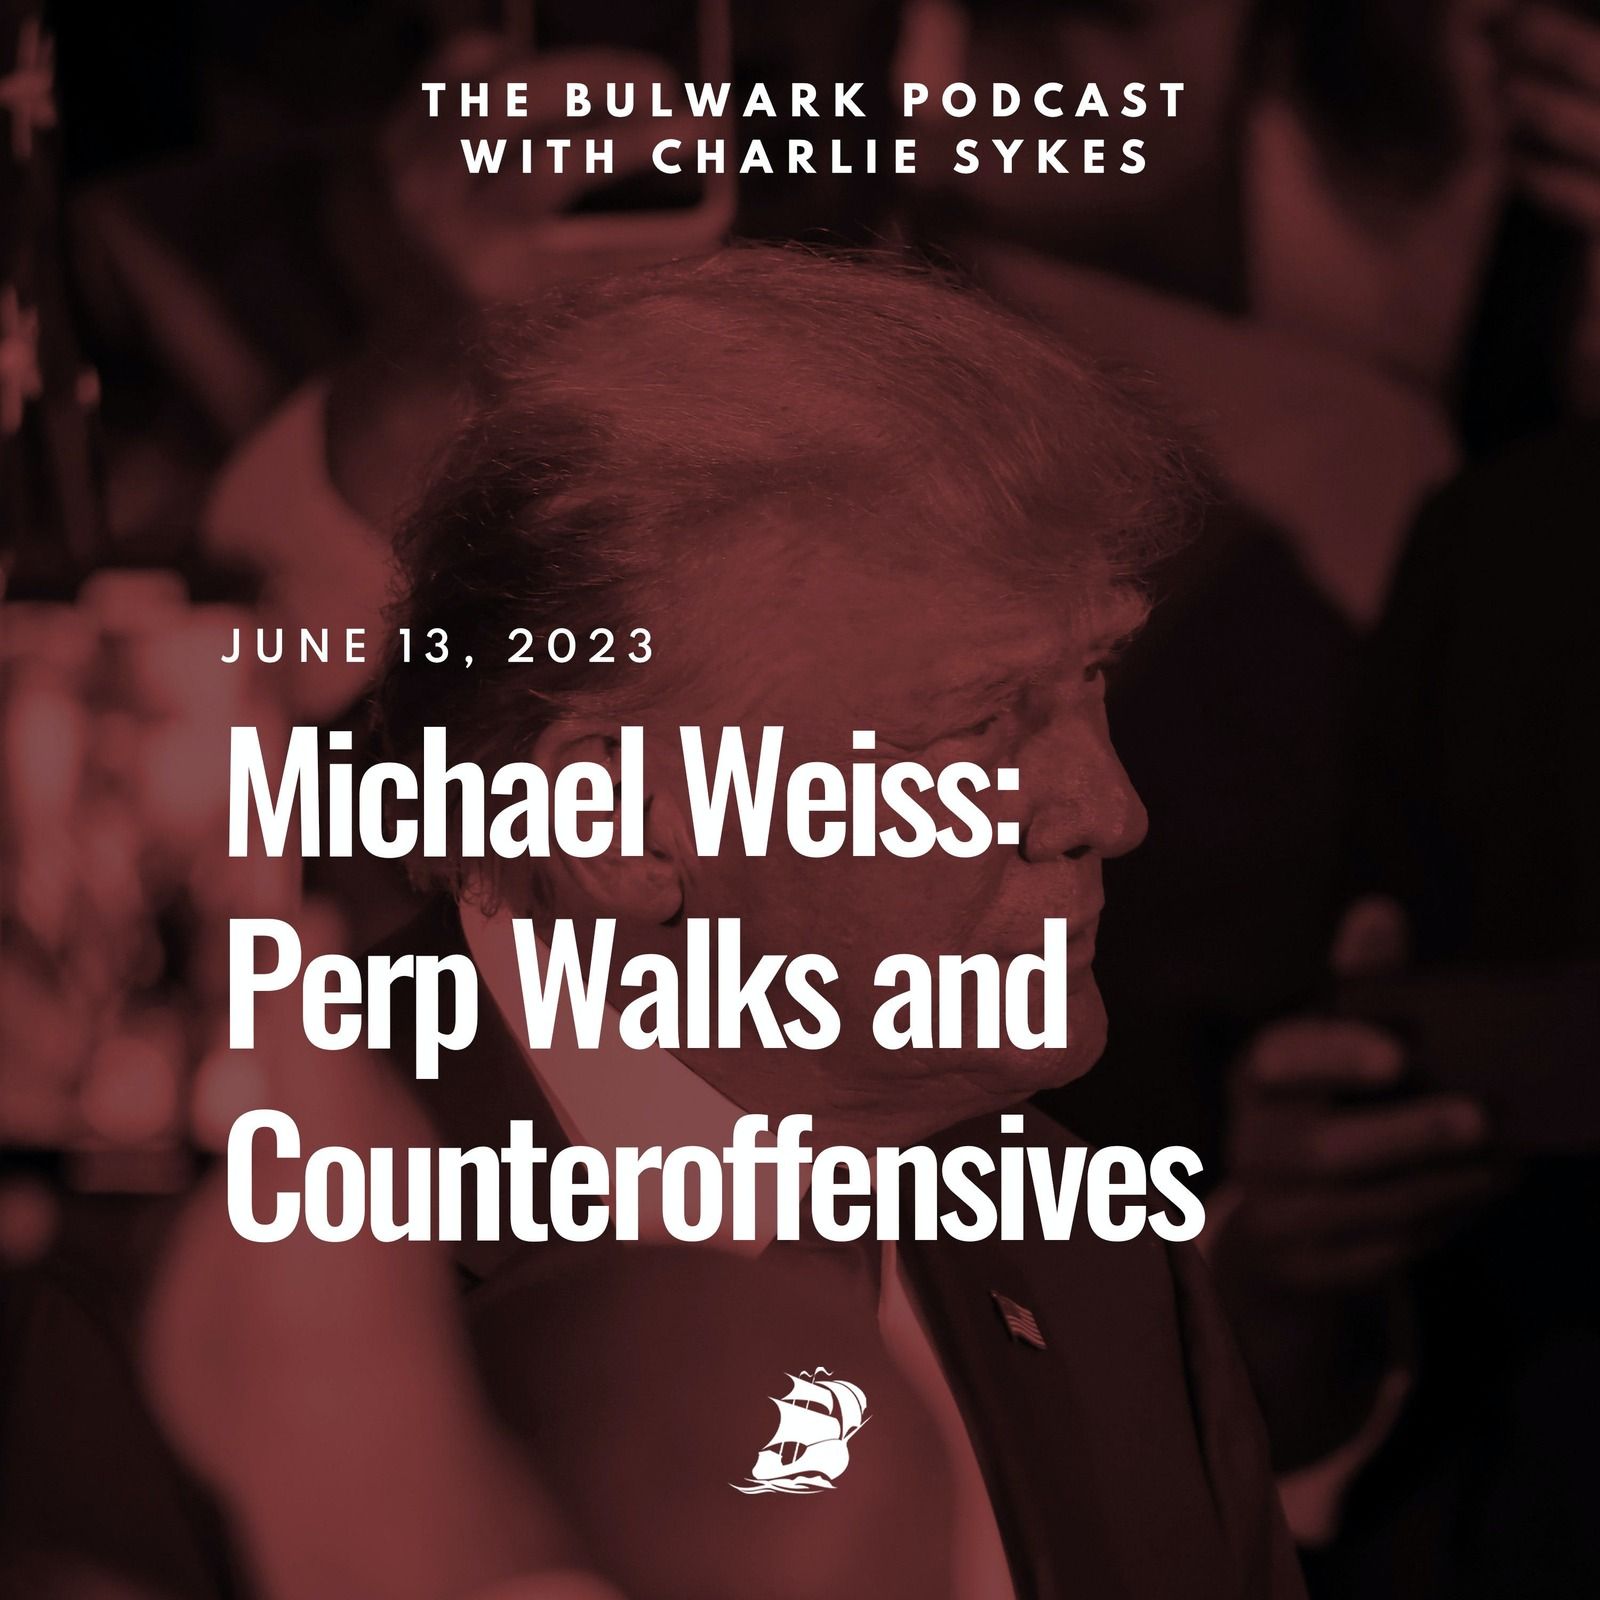 Michael Weiss: Perp Walks and Counteroffensives